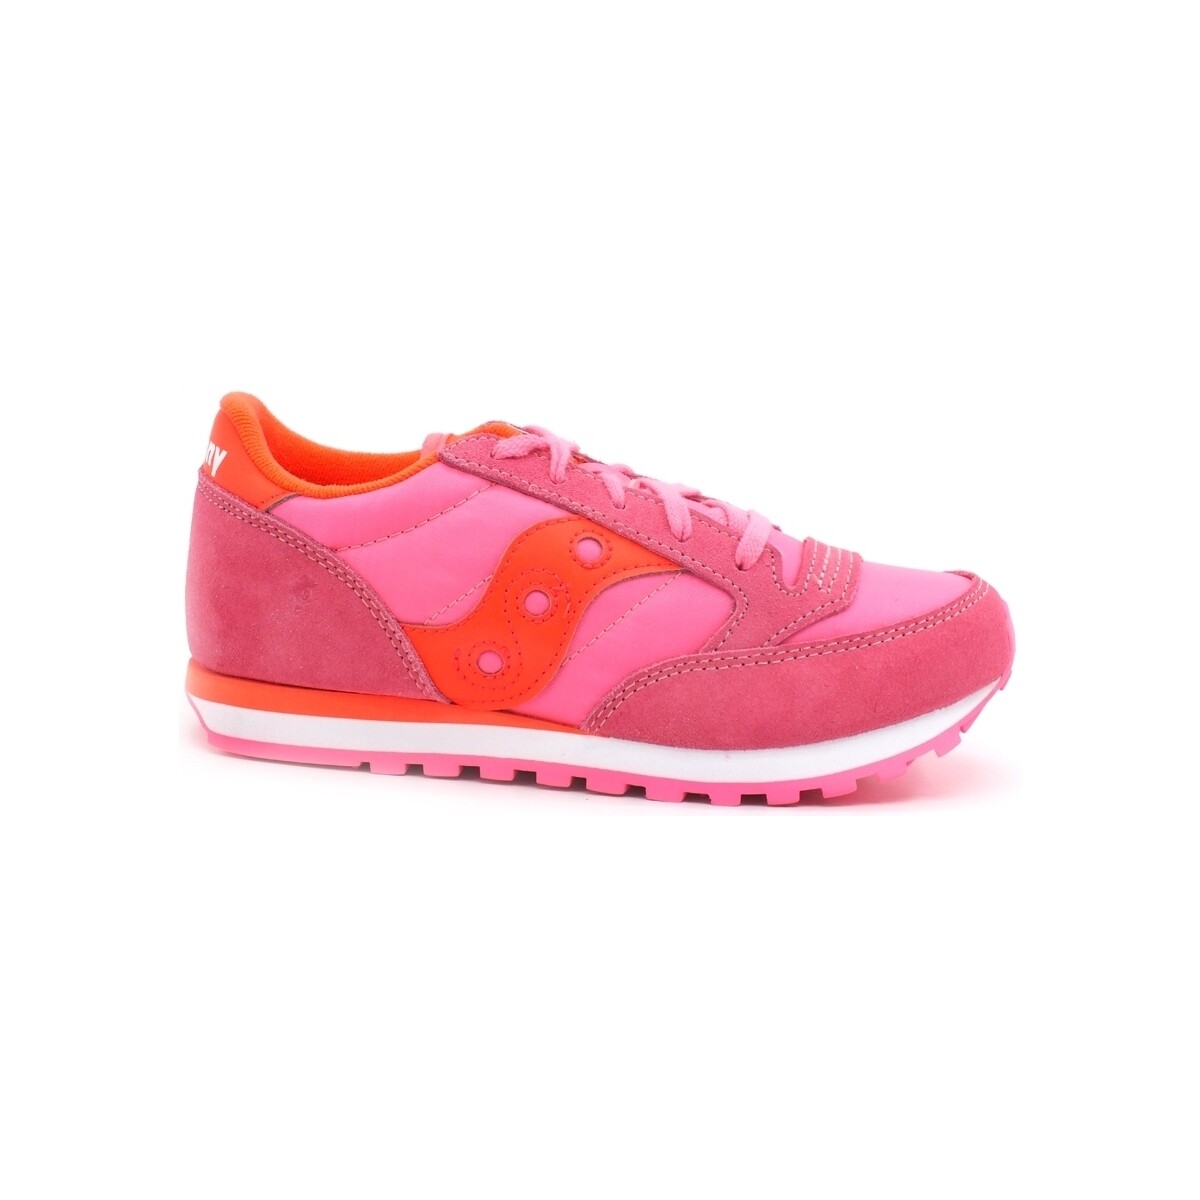 Chaussures Multisport Saucony Jazz Original Kids Sneakers Bambina Pink Red SK163330 Rose